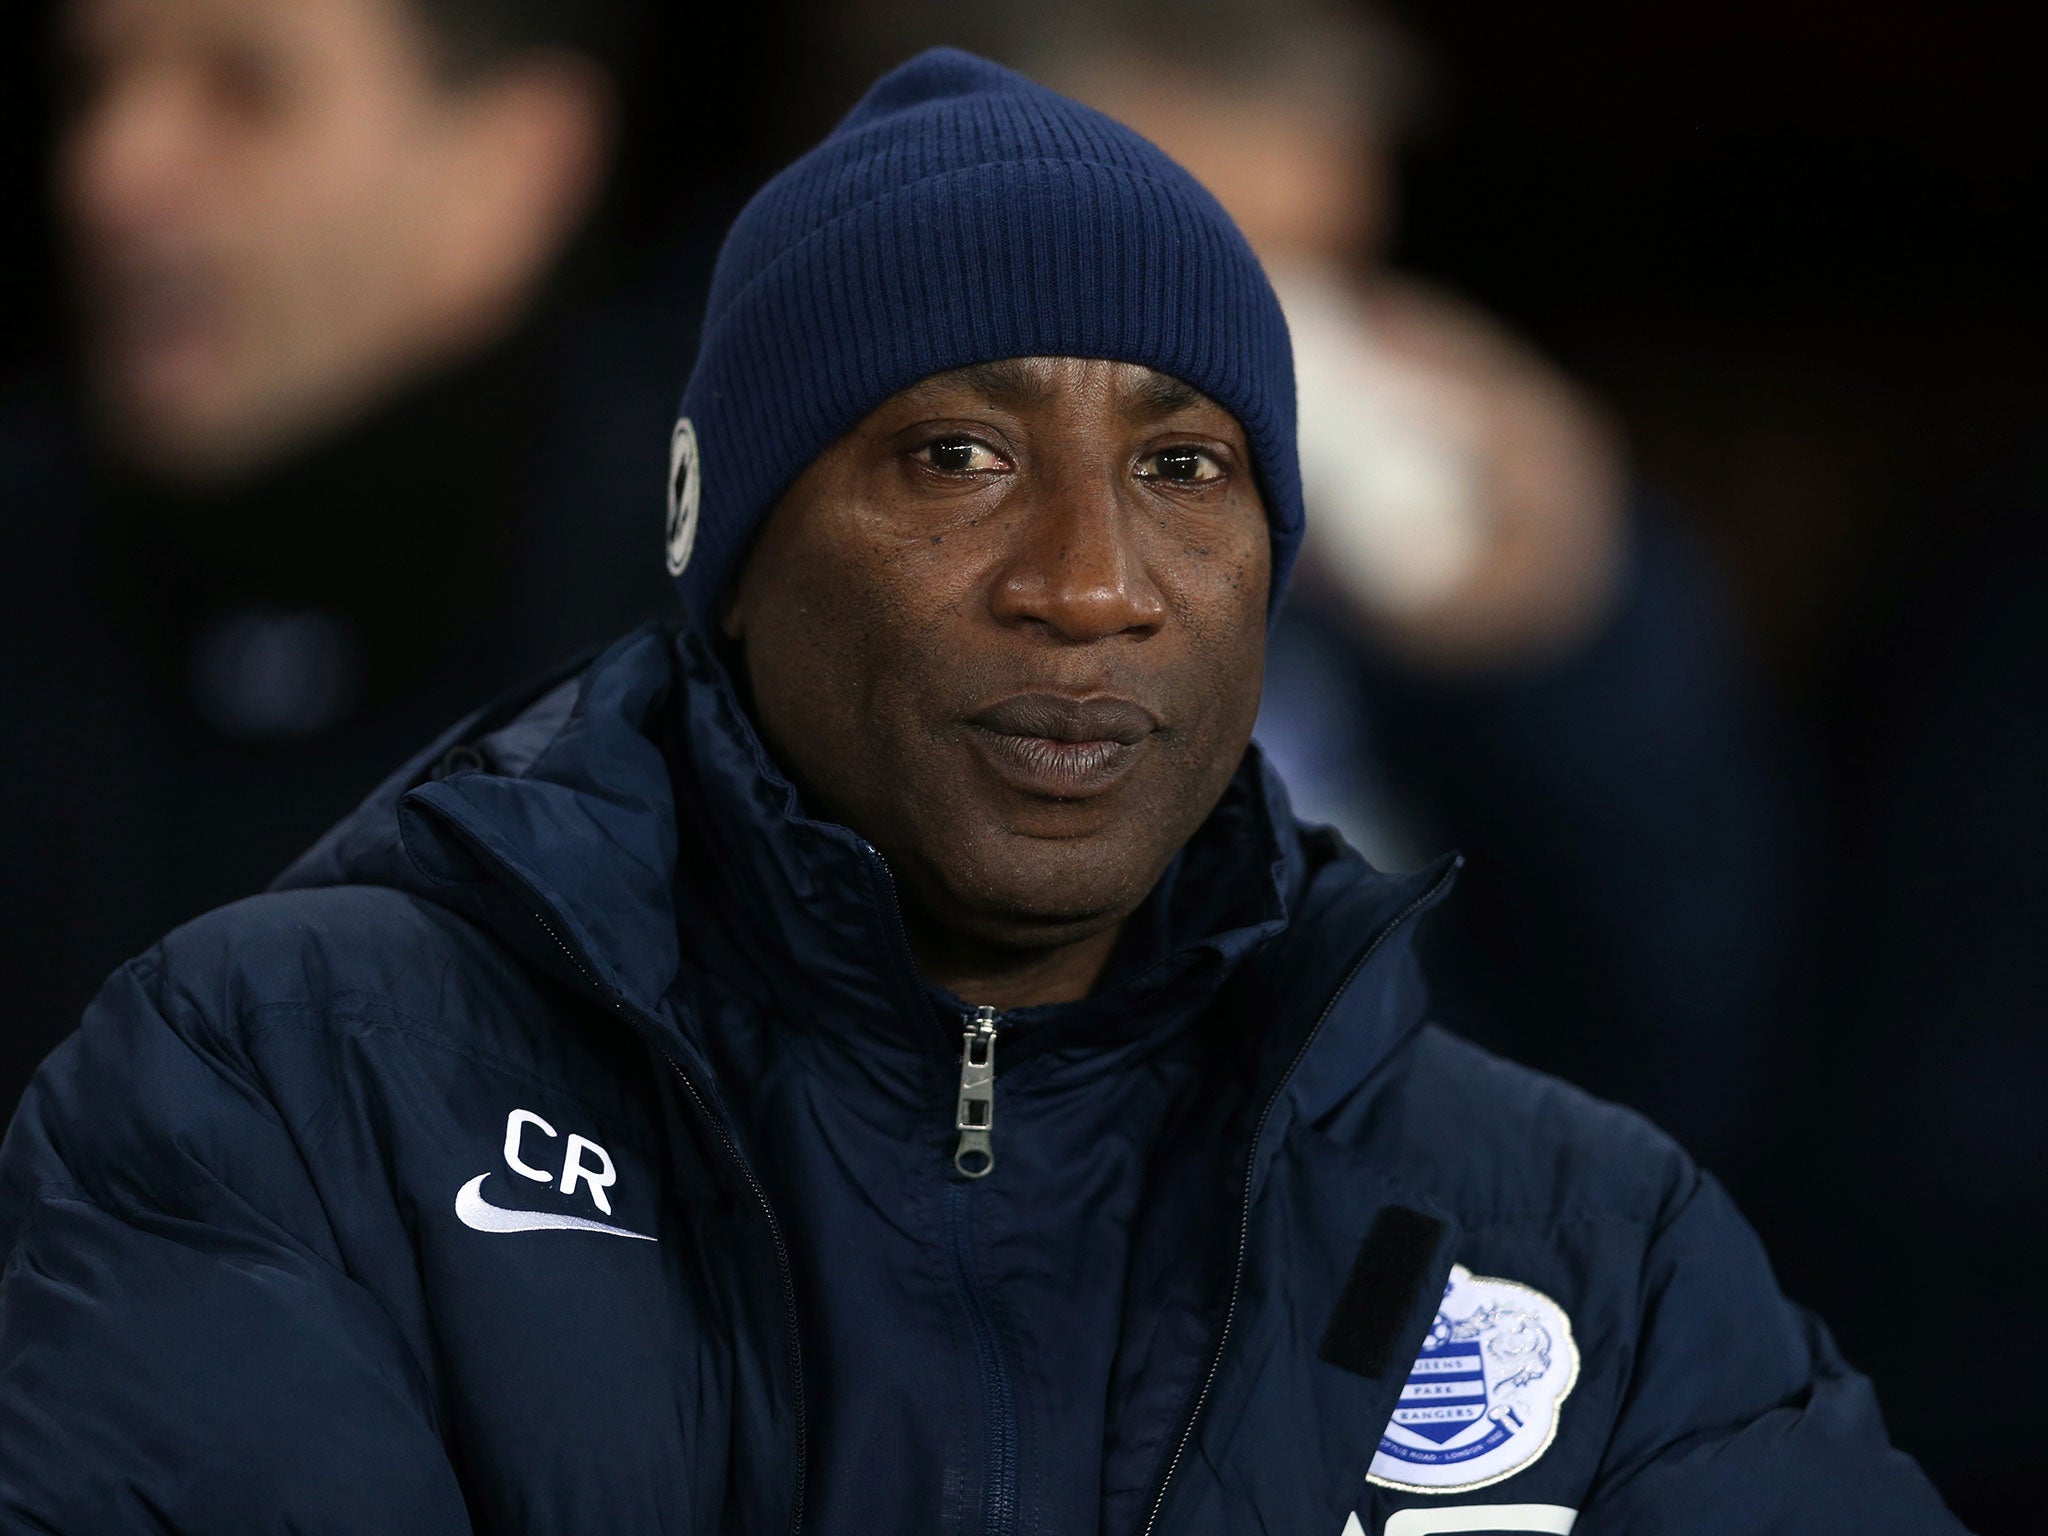 QPR will appoint Chris Ramsey as their manager until the end of the season